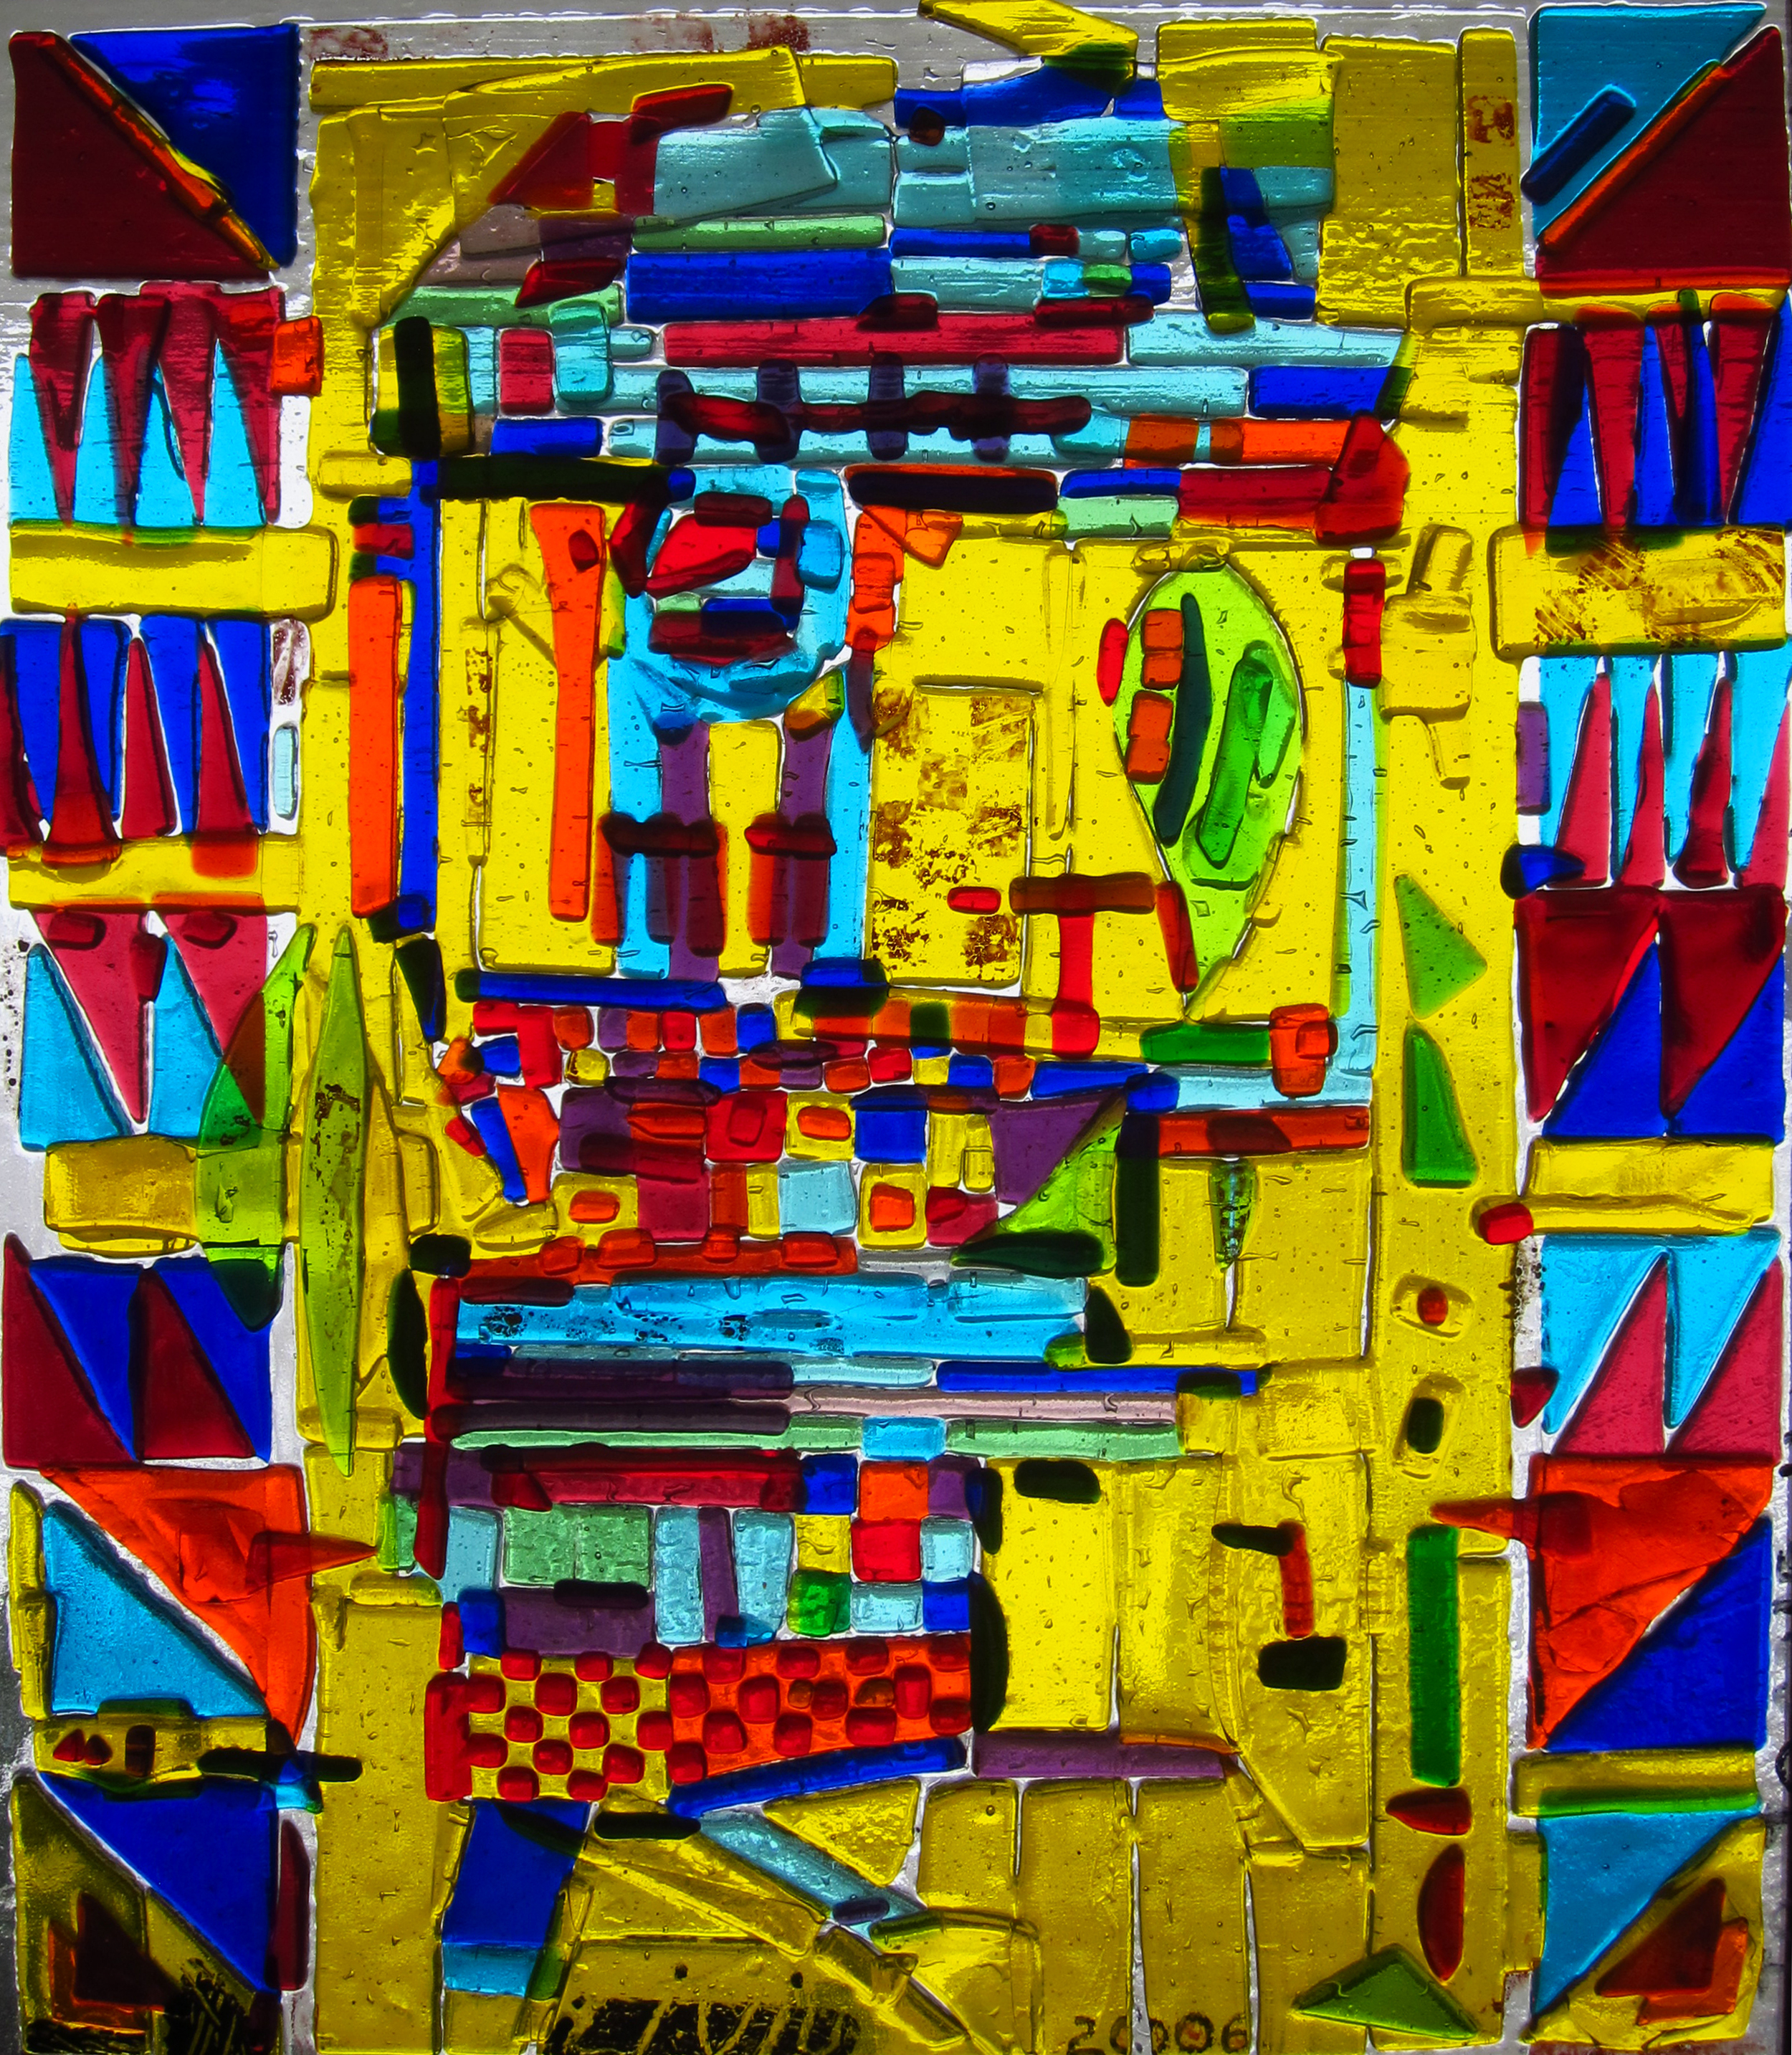  Almost abstract. &nbsp;Location: Cambridge, MA, private collection.  2006  Fused glass 